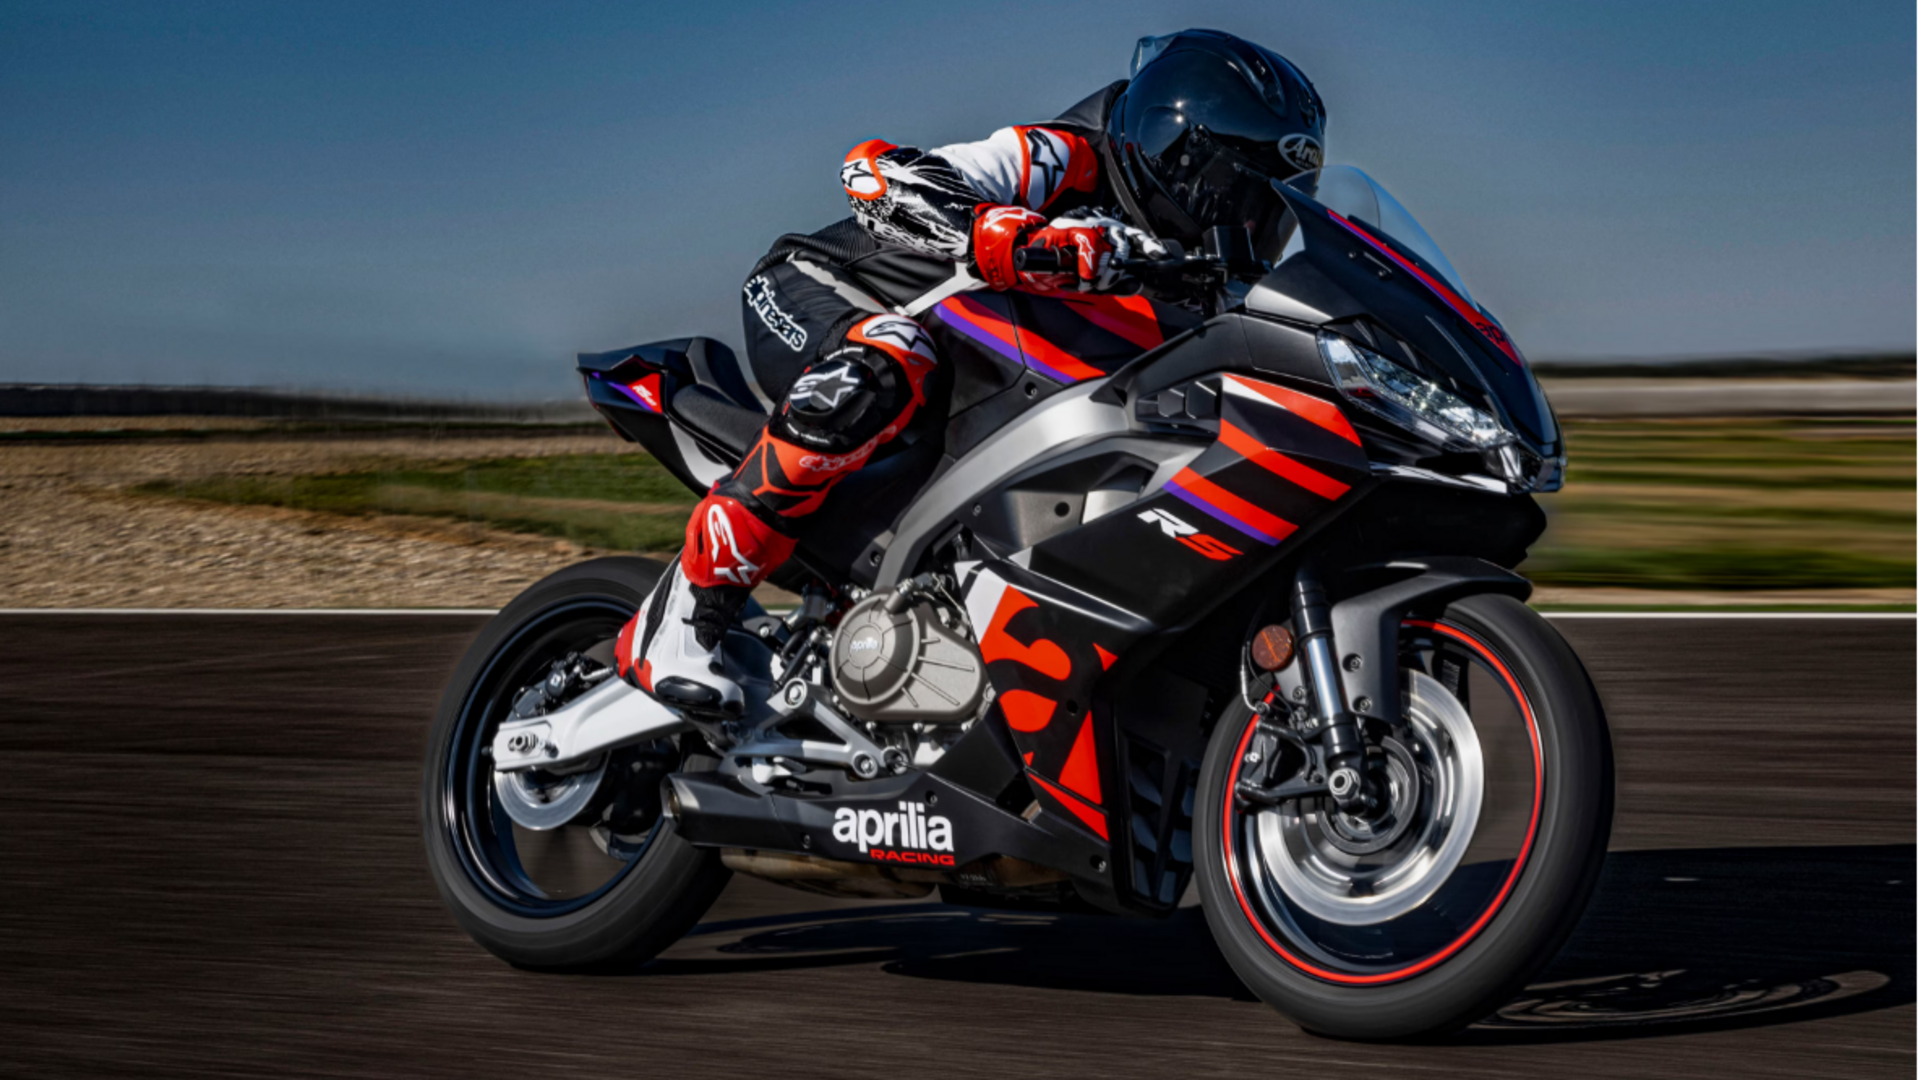 Accessories list of Aprilia RS 457 revealed in India